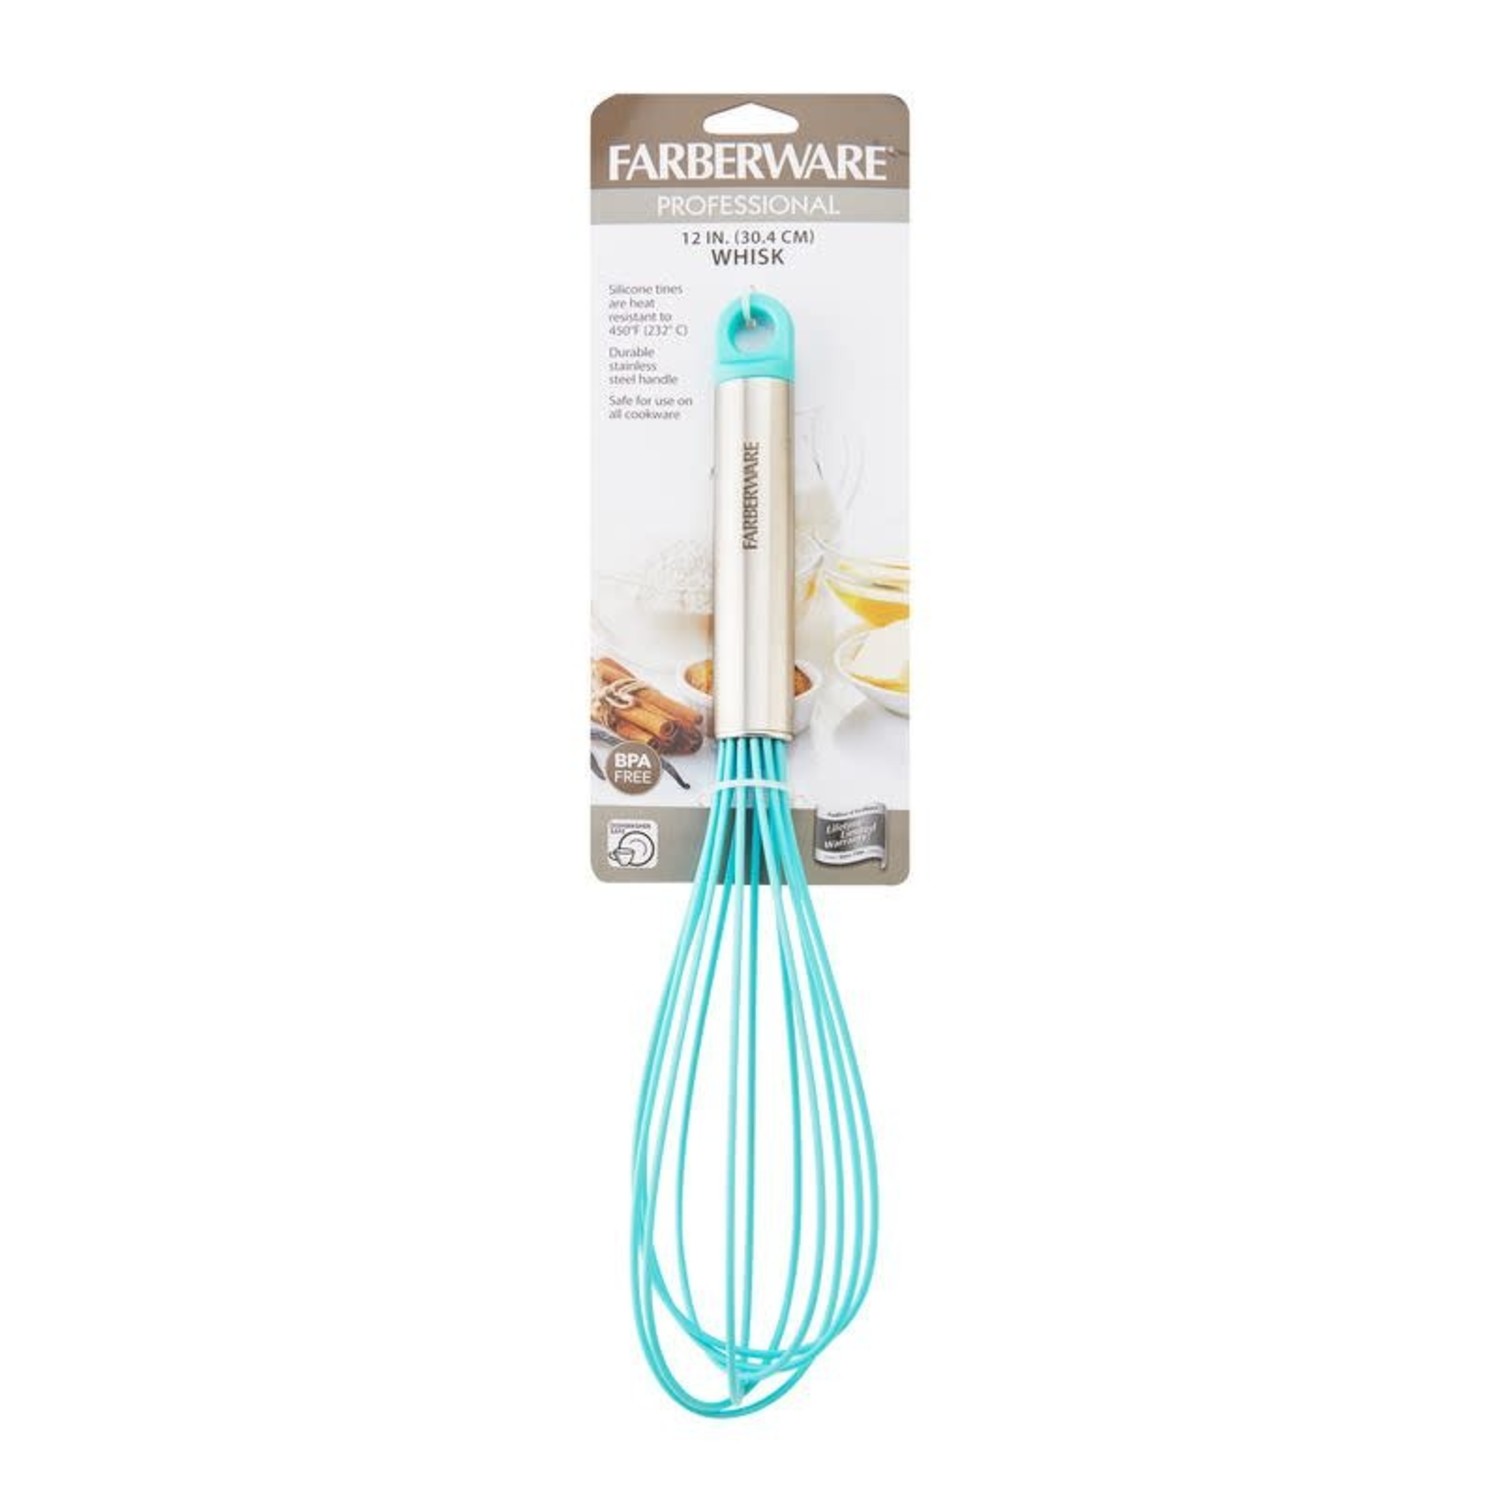 KitchenAid Cooks Silicone Utility Whisk (Red)